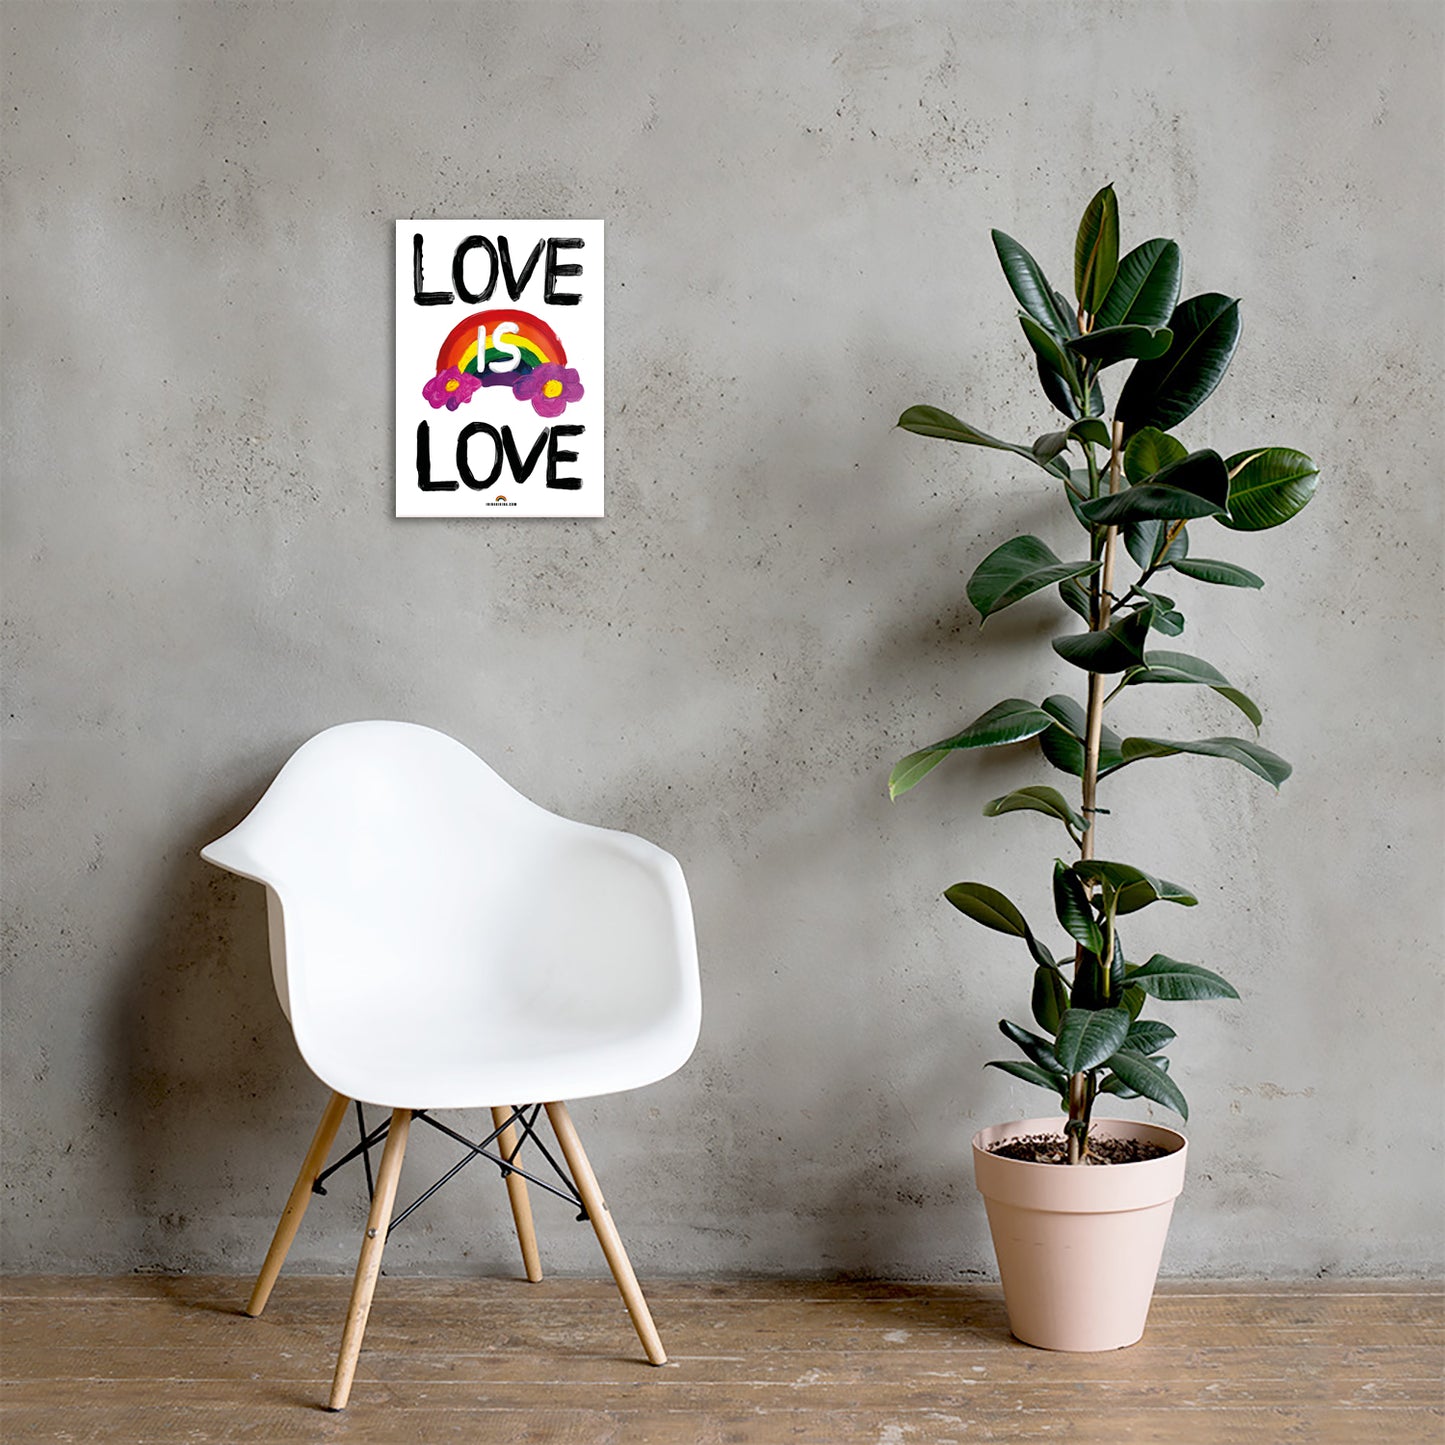 Love is Love Painted Artwork A4 Poster.